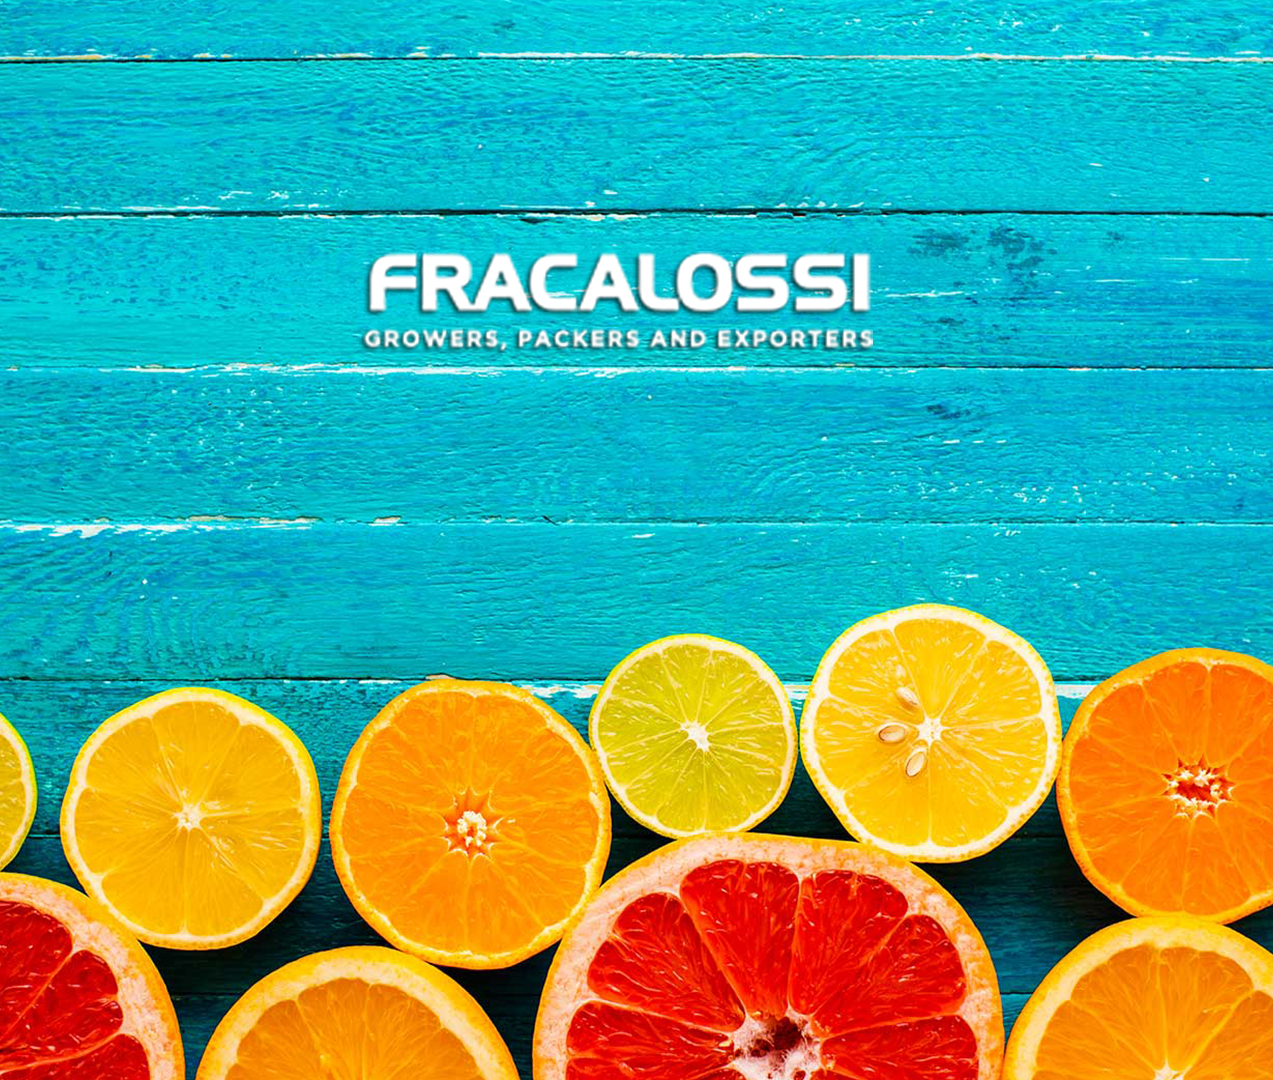 Fracalossi S.A. Is more than a family business, it is a passion for what we love